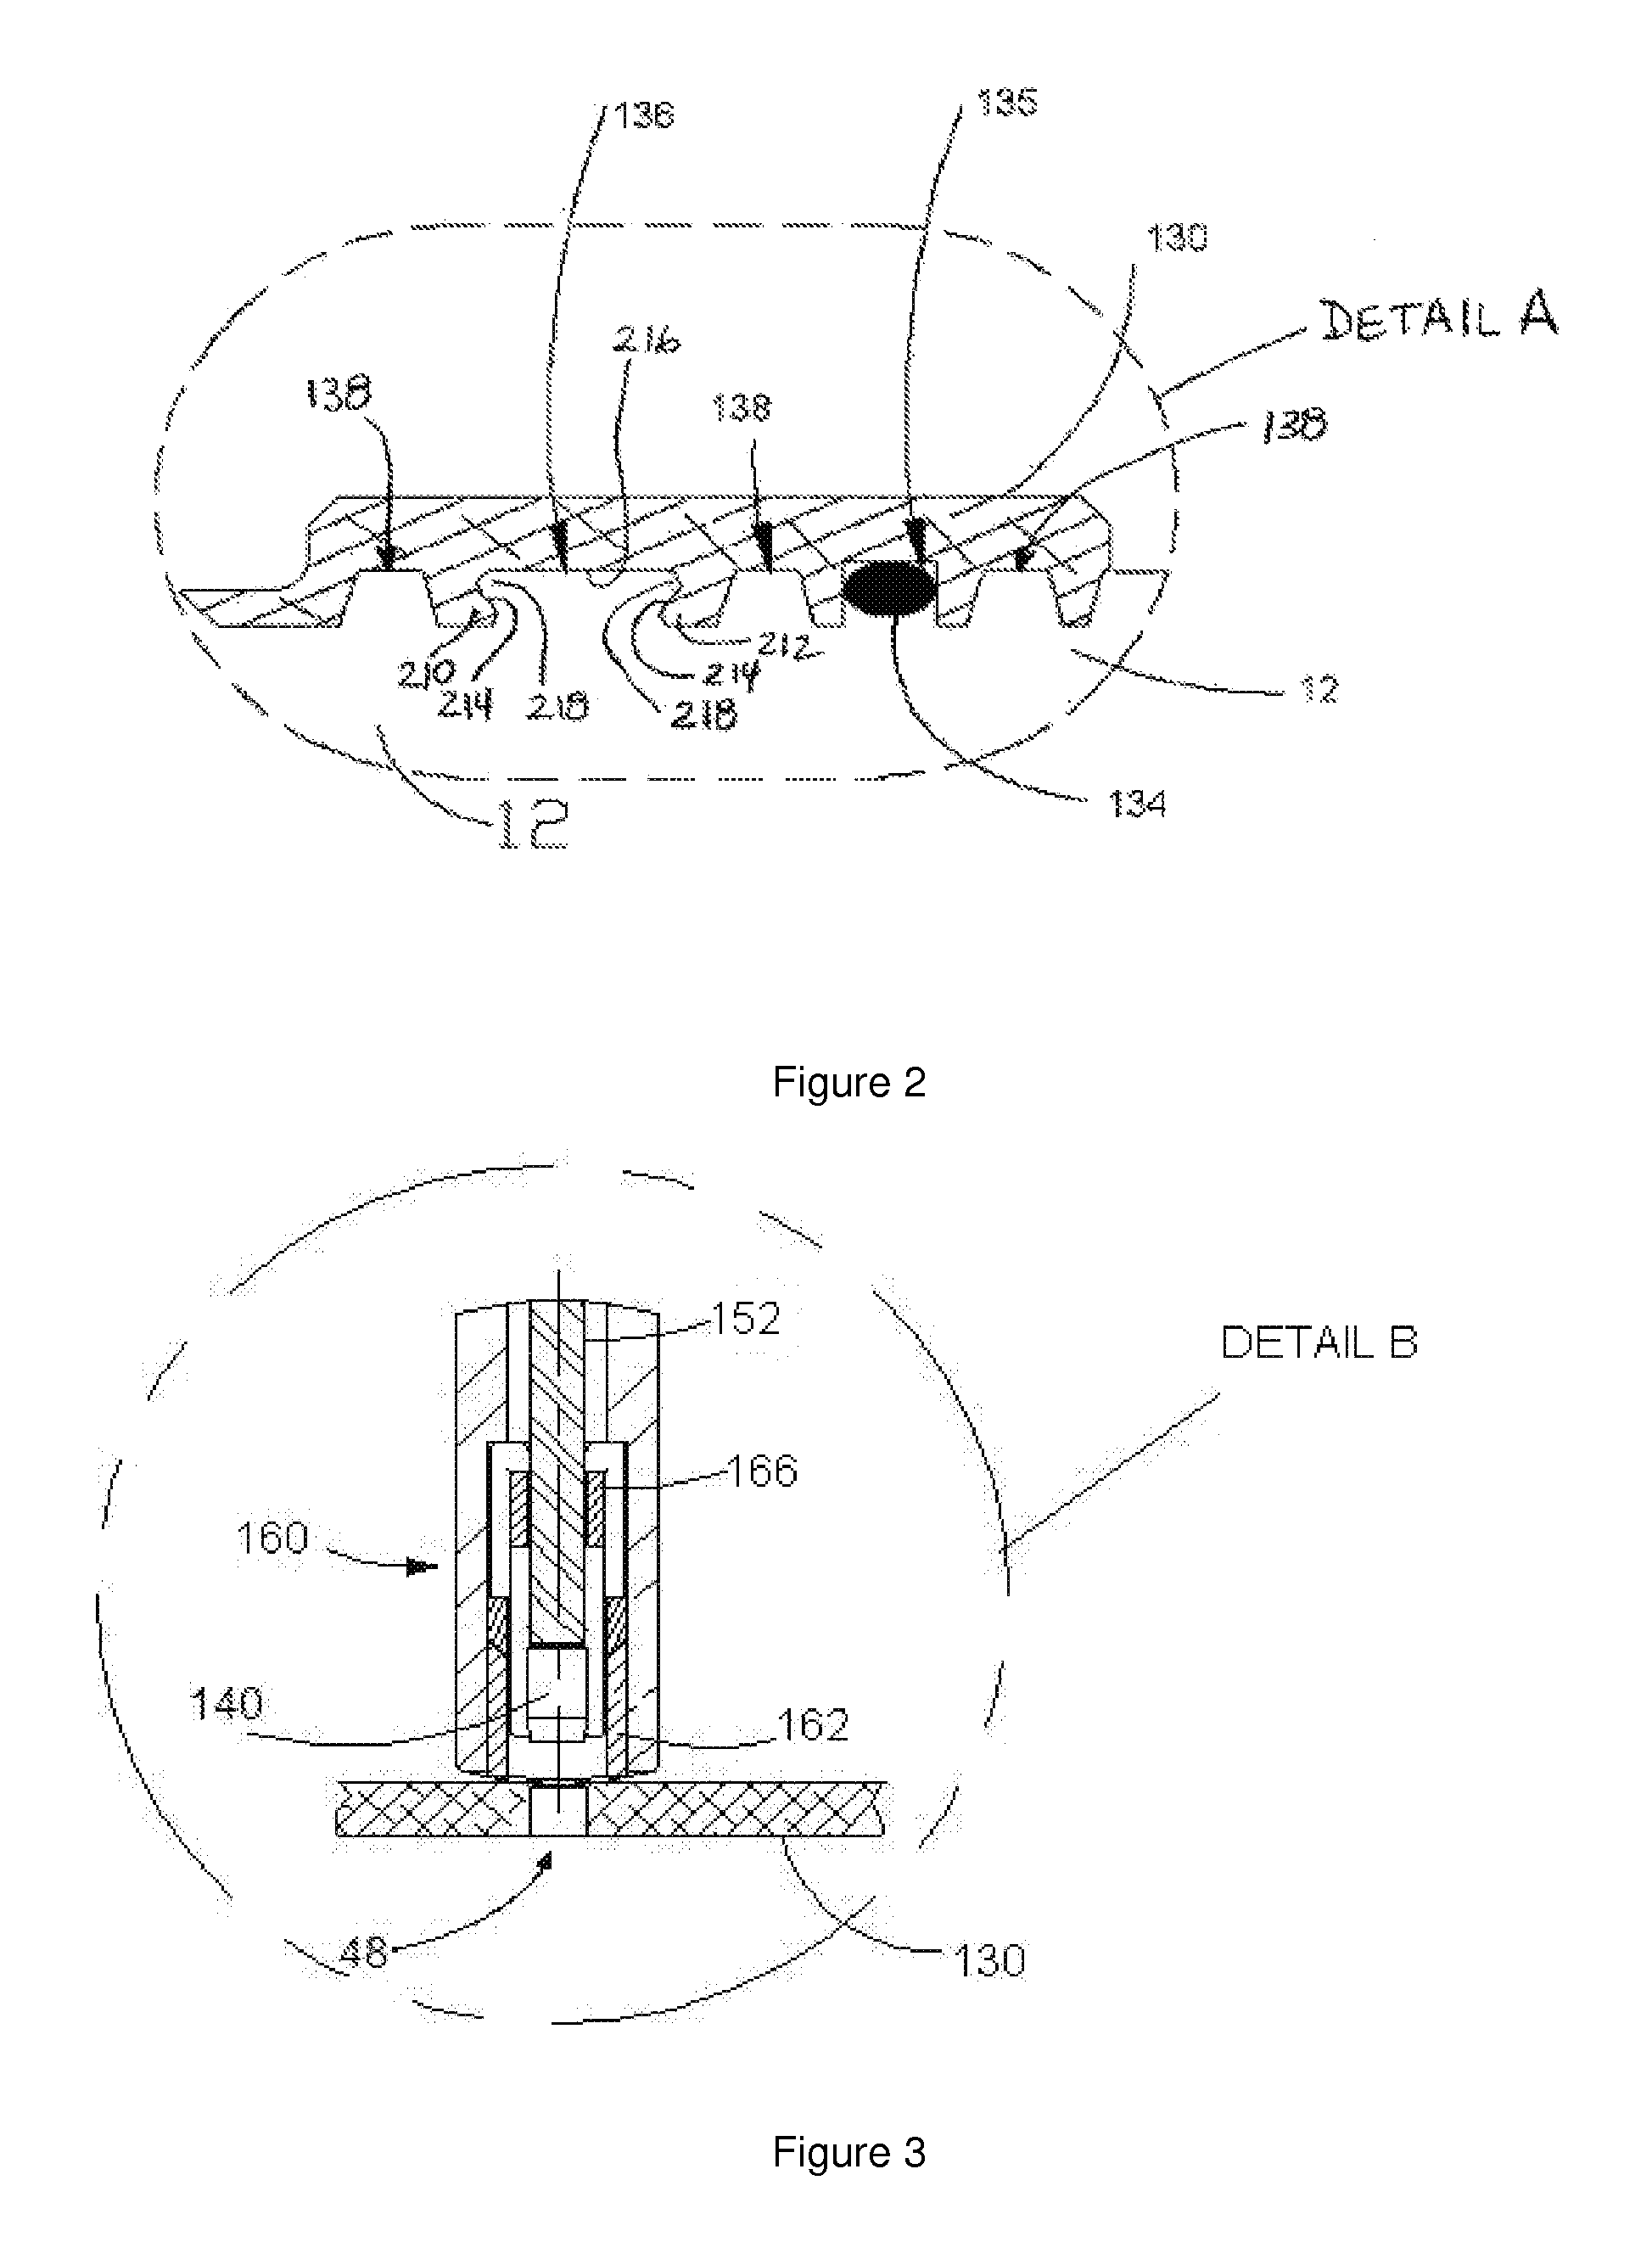 Integrated method for restoring electrical power cable